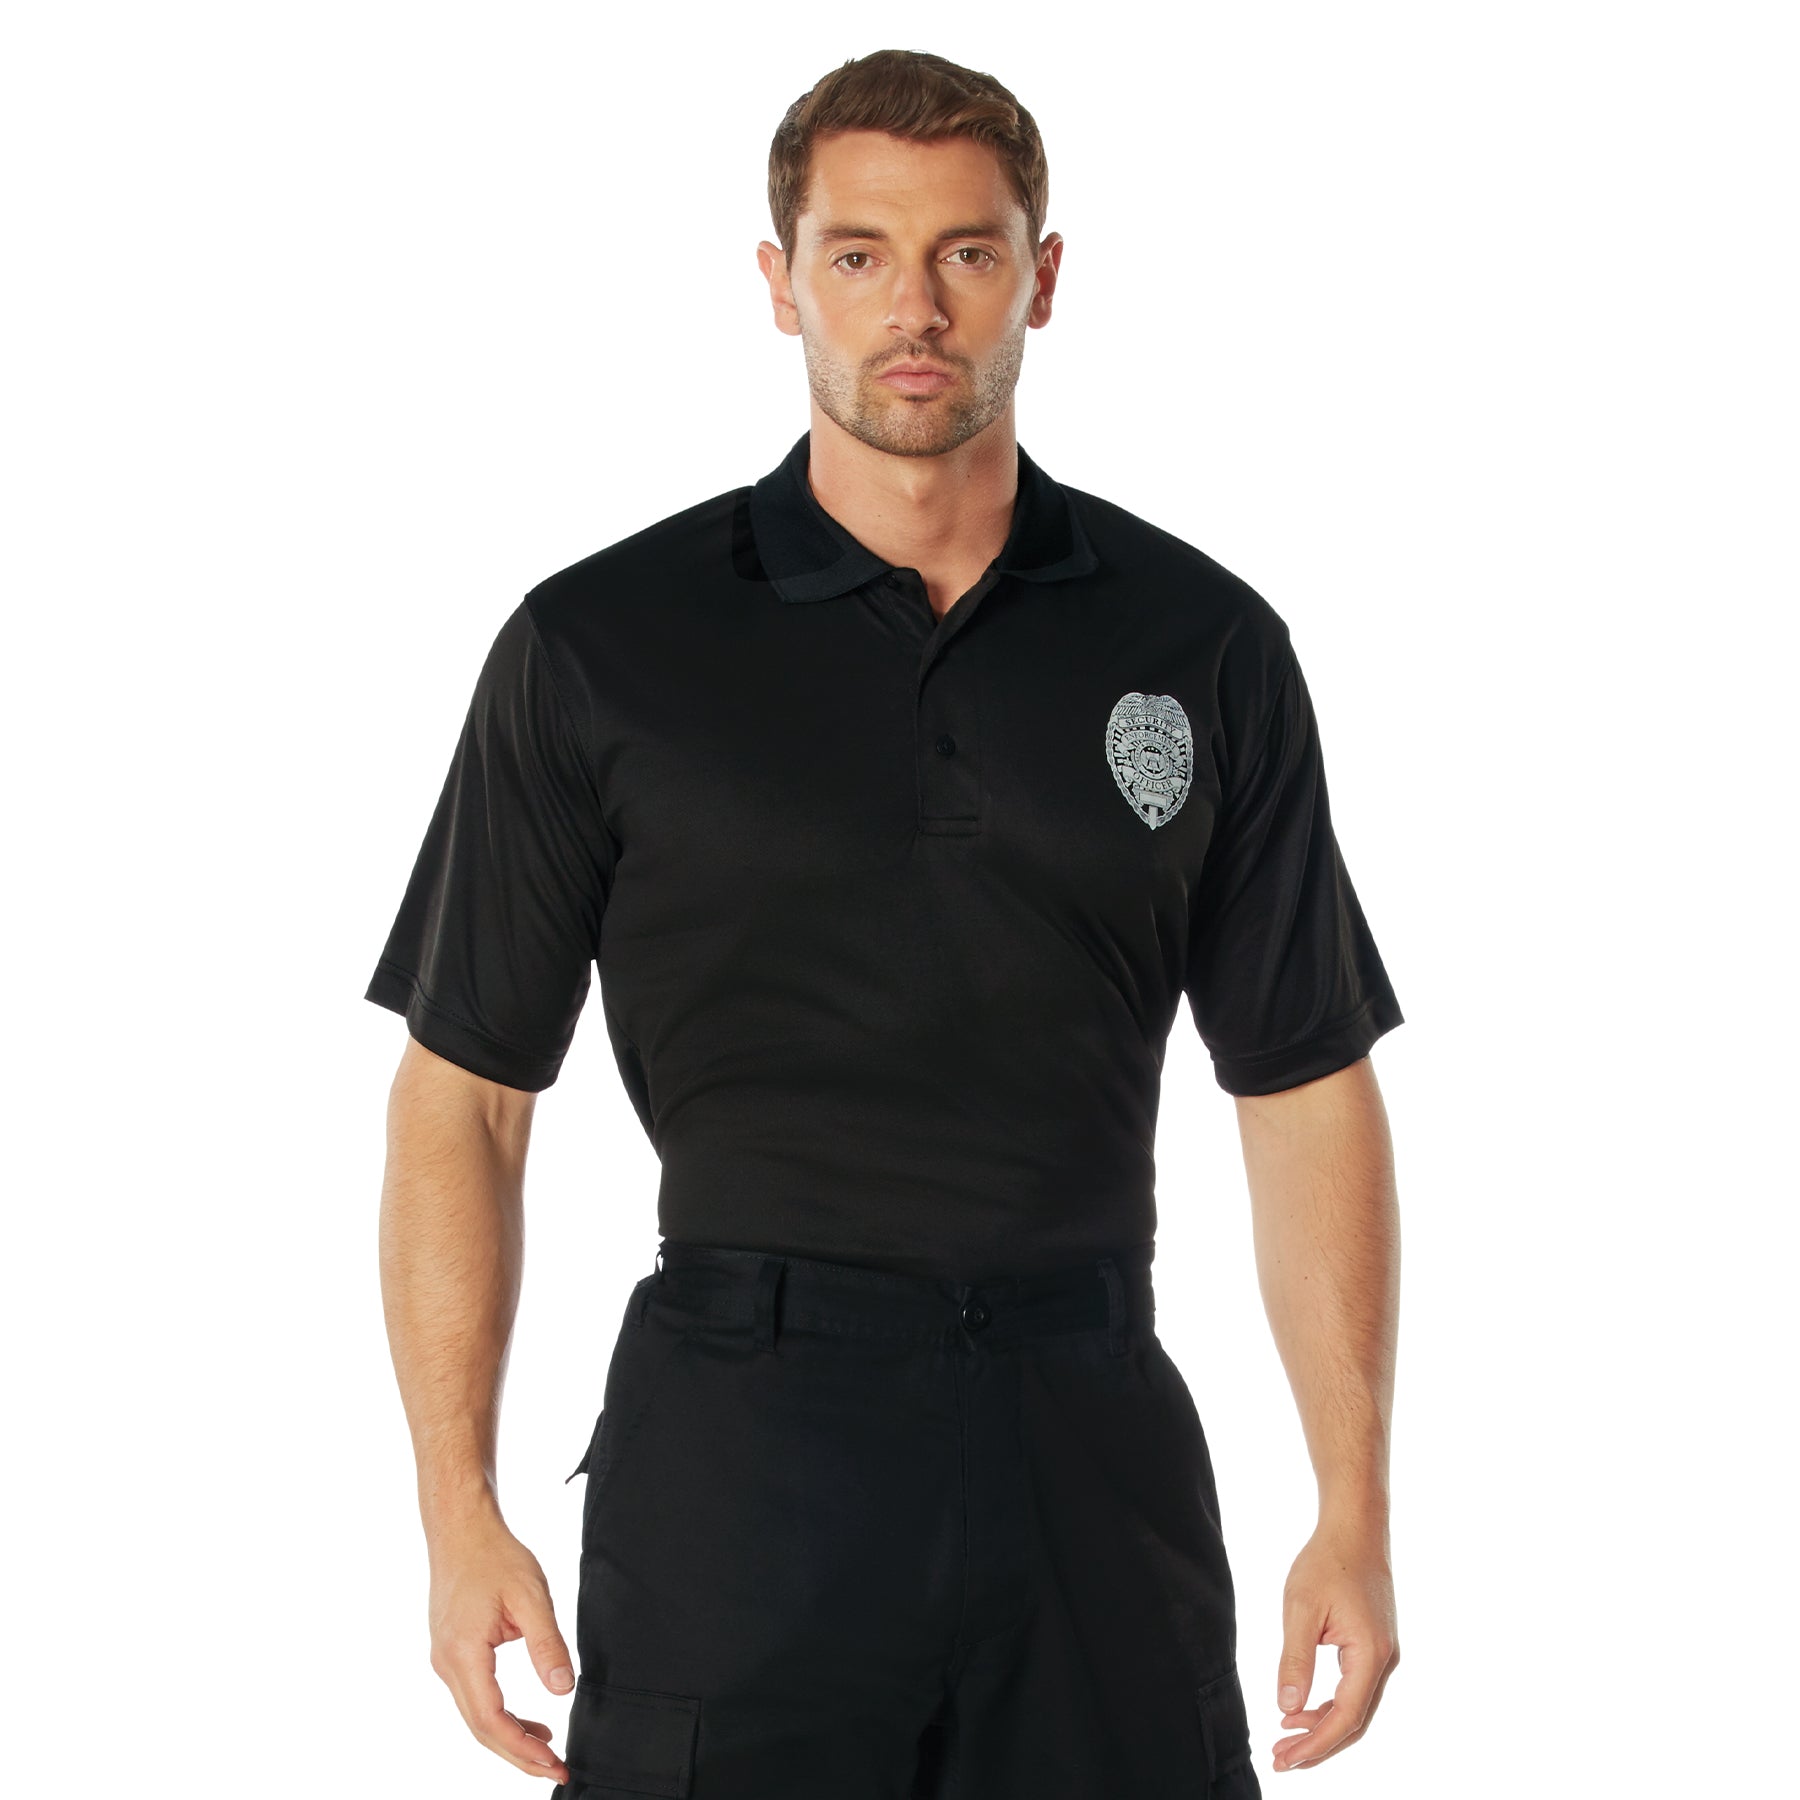 [Public Safety] Poly Moisture Wicking Security Badge Polo T-Shirts Security White - Black